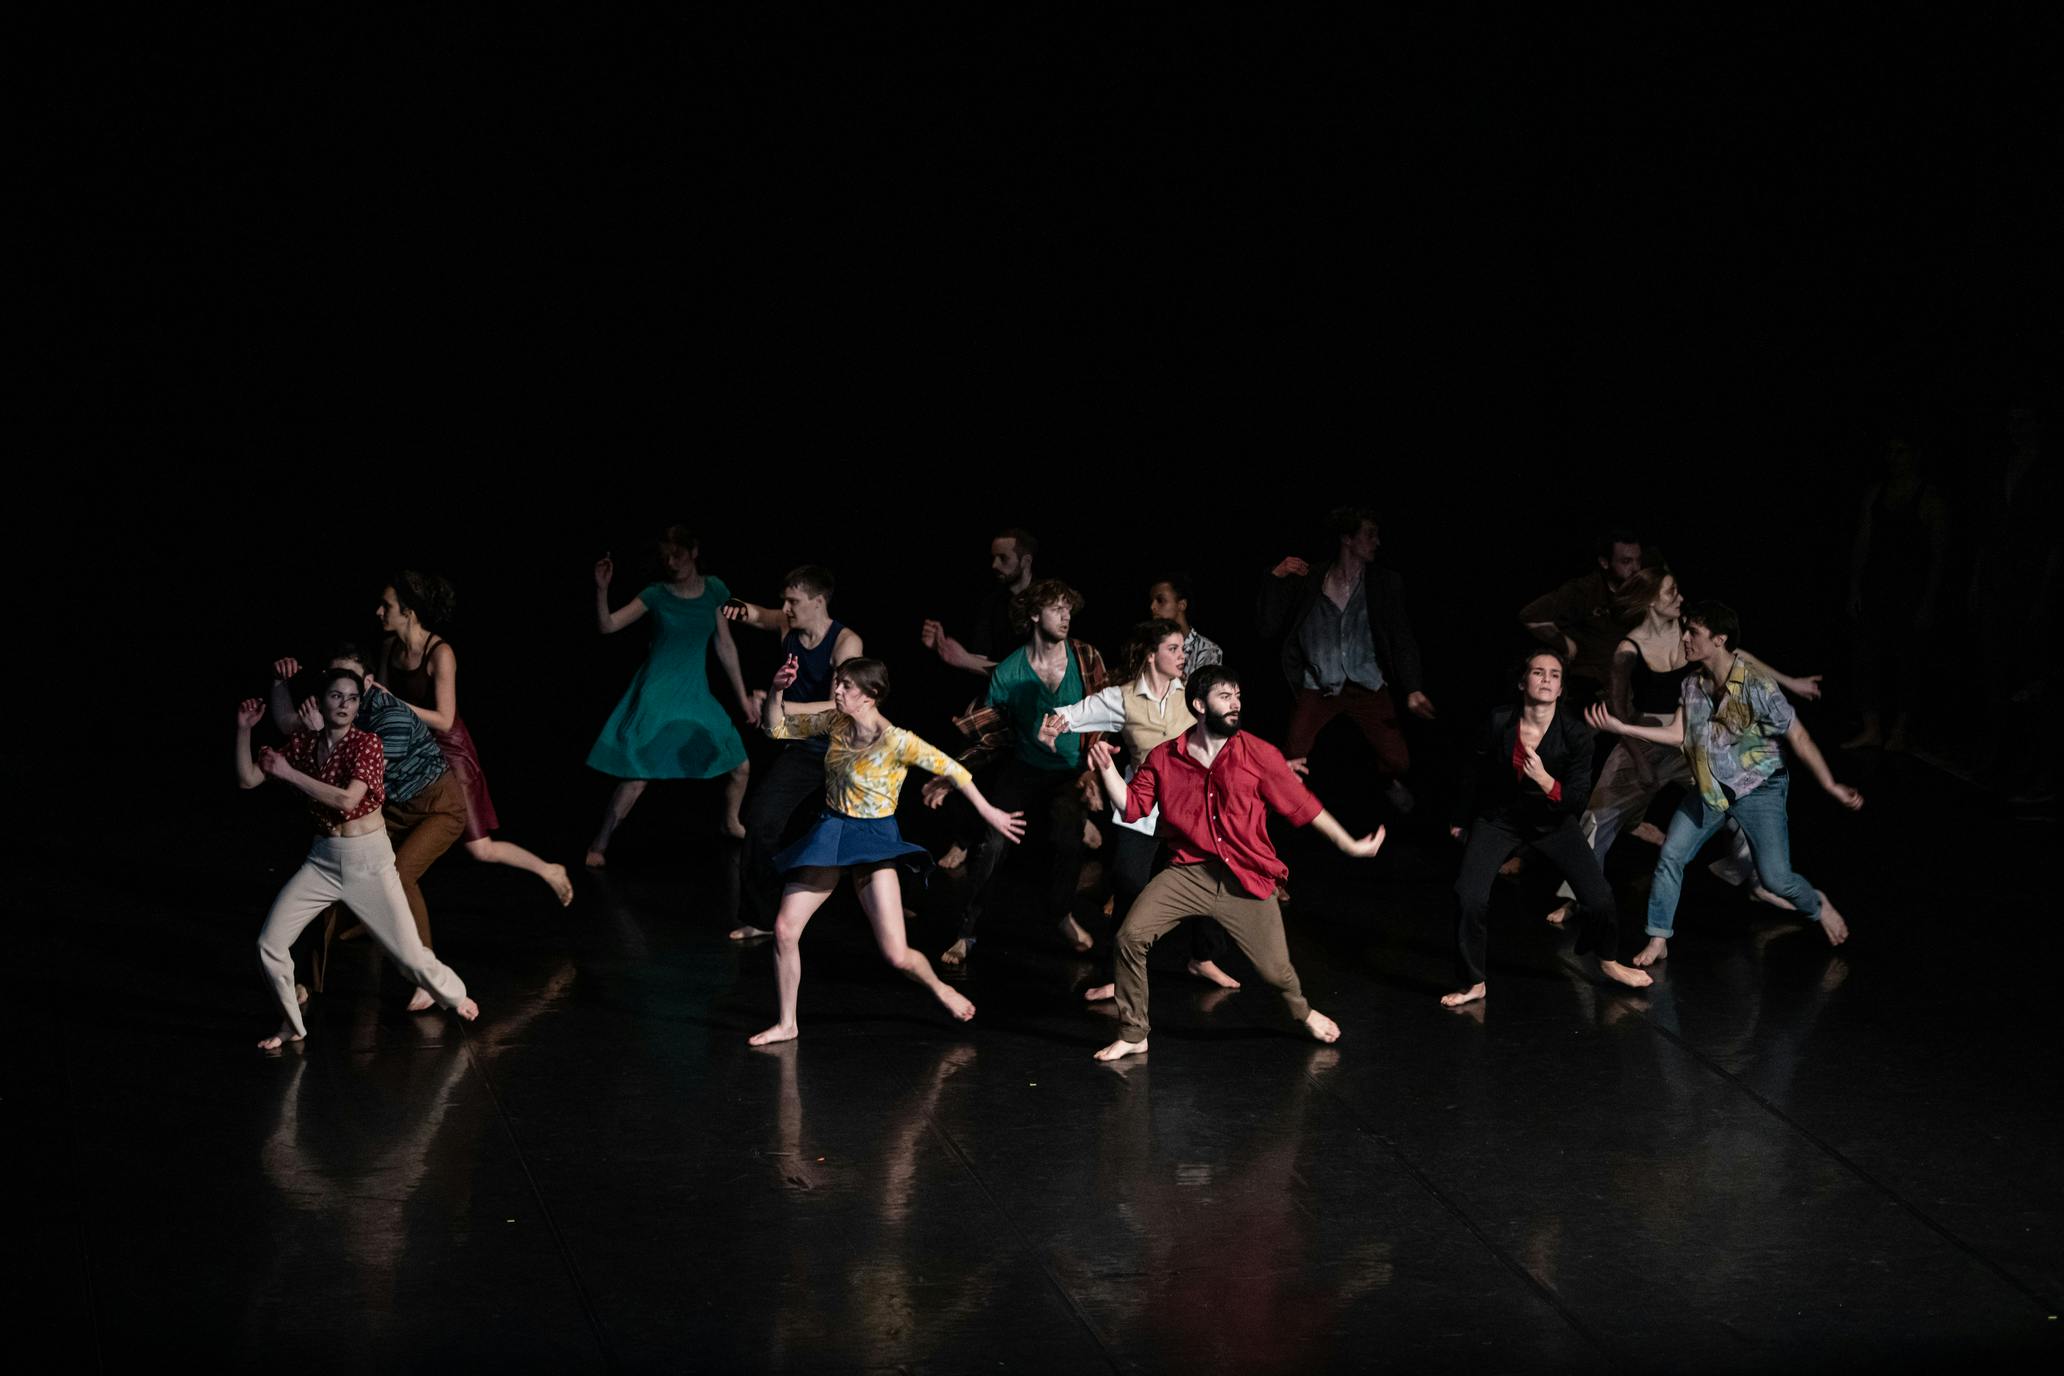 A group of performers in colorful clothing dance in the space. The figures emerge from a dark background.